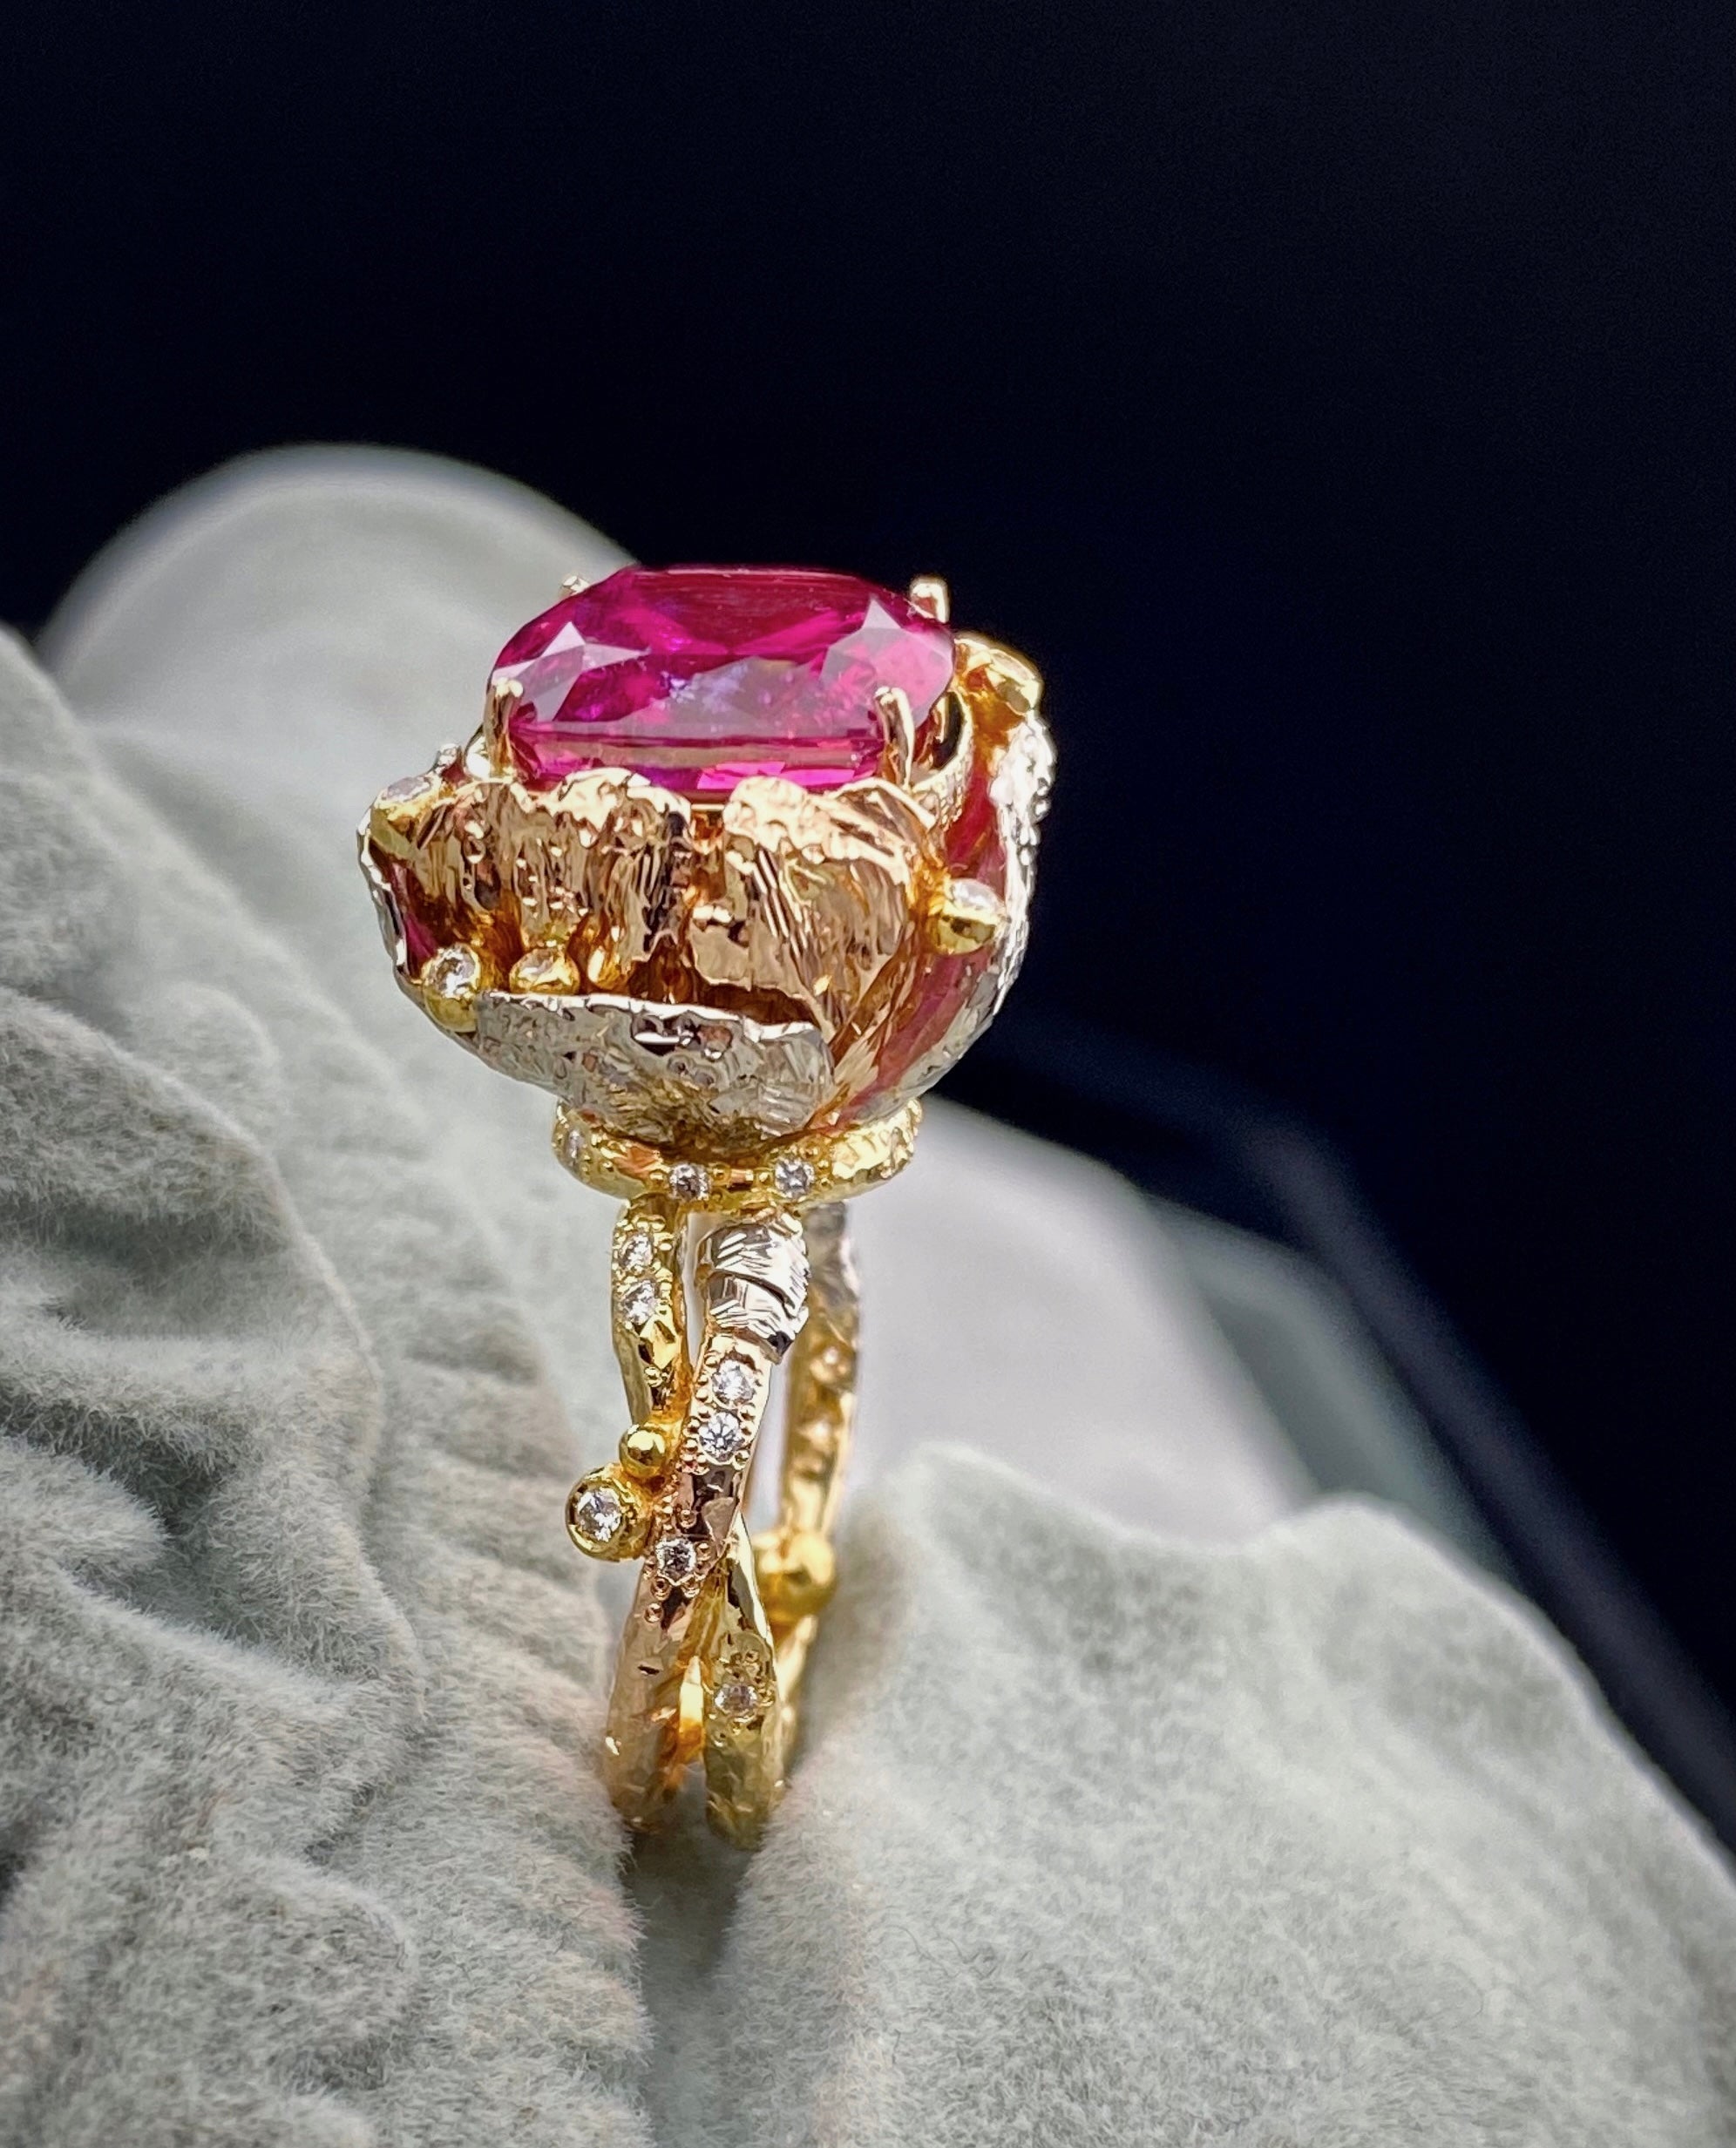 Peony King Ring - This is example of unique 7,81ct Tourmaline (Rubellite) ring. Absolutely breath taking red/violet tourmaline.  The ring hand crafted of 18kt & 22kt white, yellow, rose gold with master engraving technique. The whole ring is